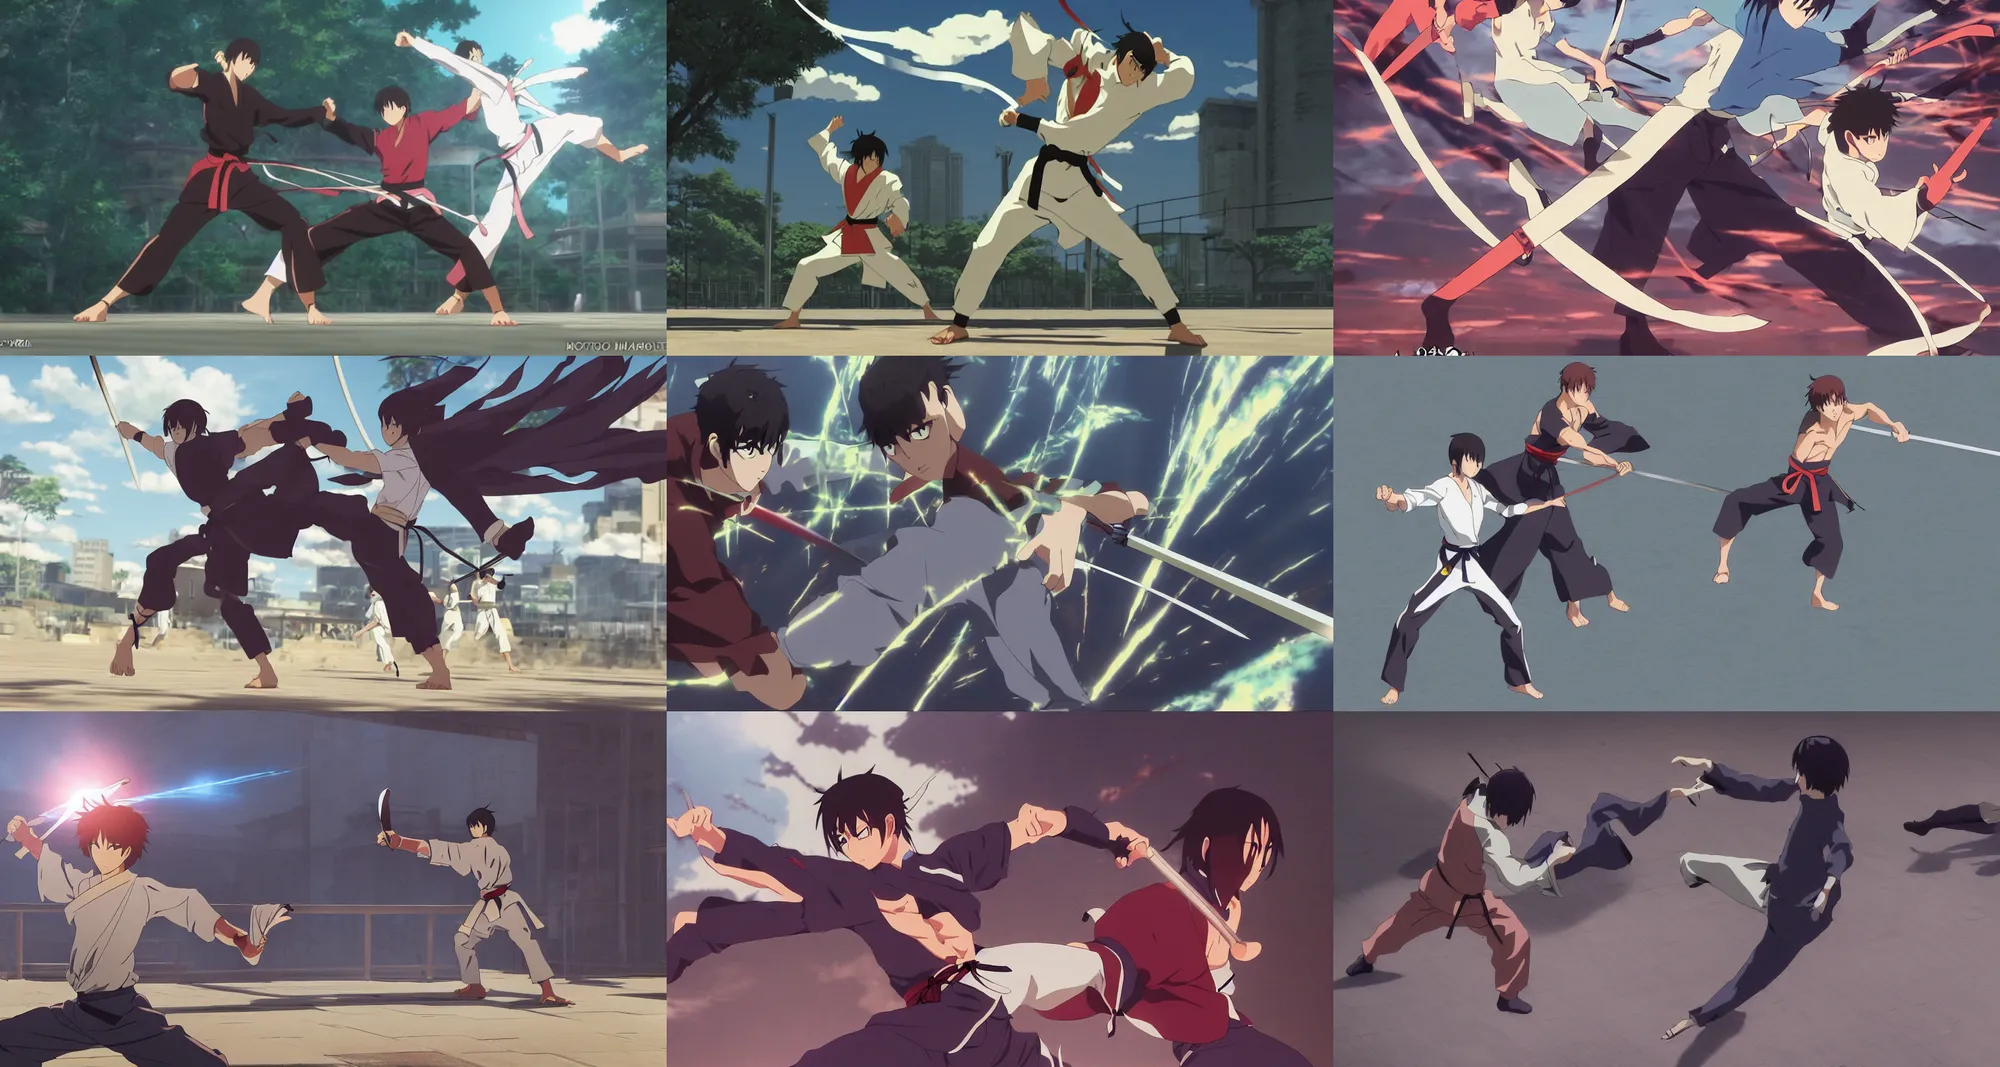 dynamic sword fighting poses